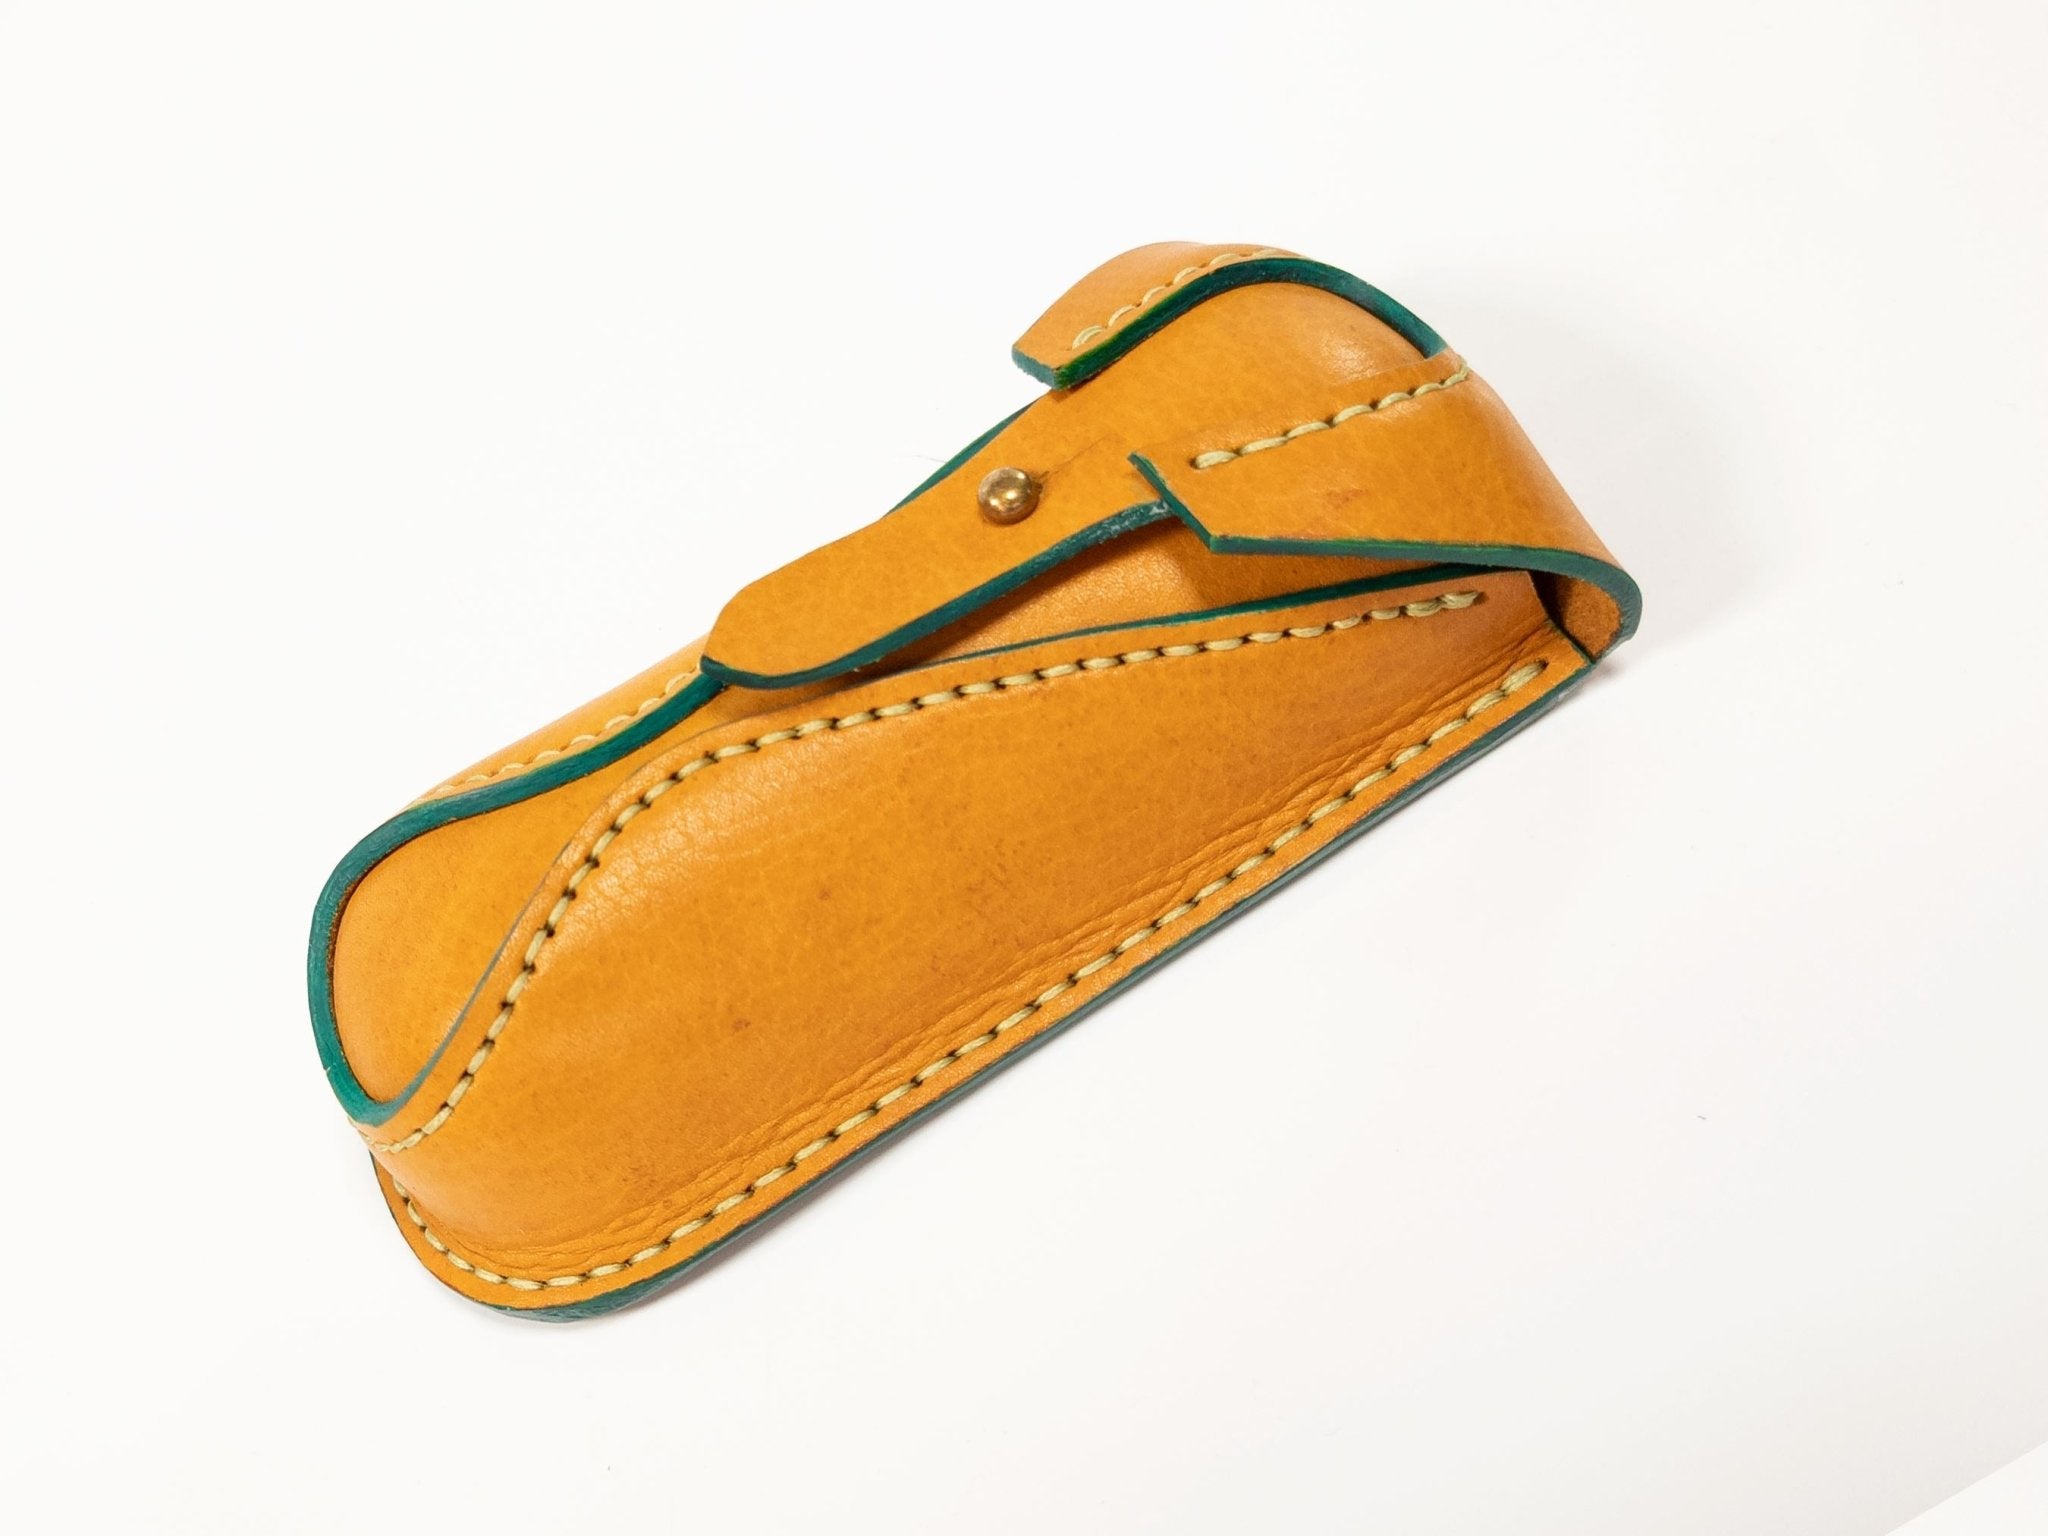 The Eyewear Case Is Designed in a Fashionable and Colorful Way. It Is Made  of Monogram Canvas and Vvn Leather to Protect Valuable Sunglasses From  Scratches - China Glasses and Sunglasses price